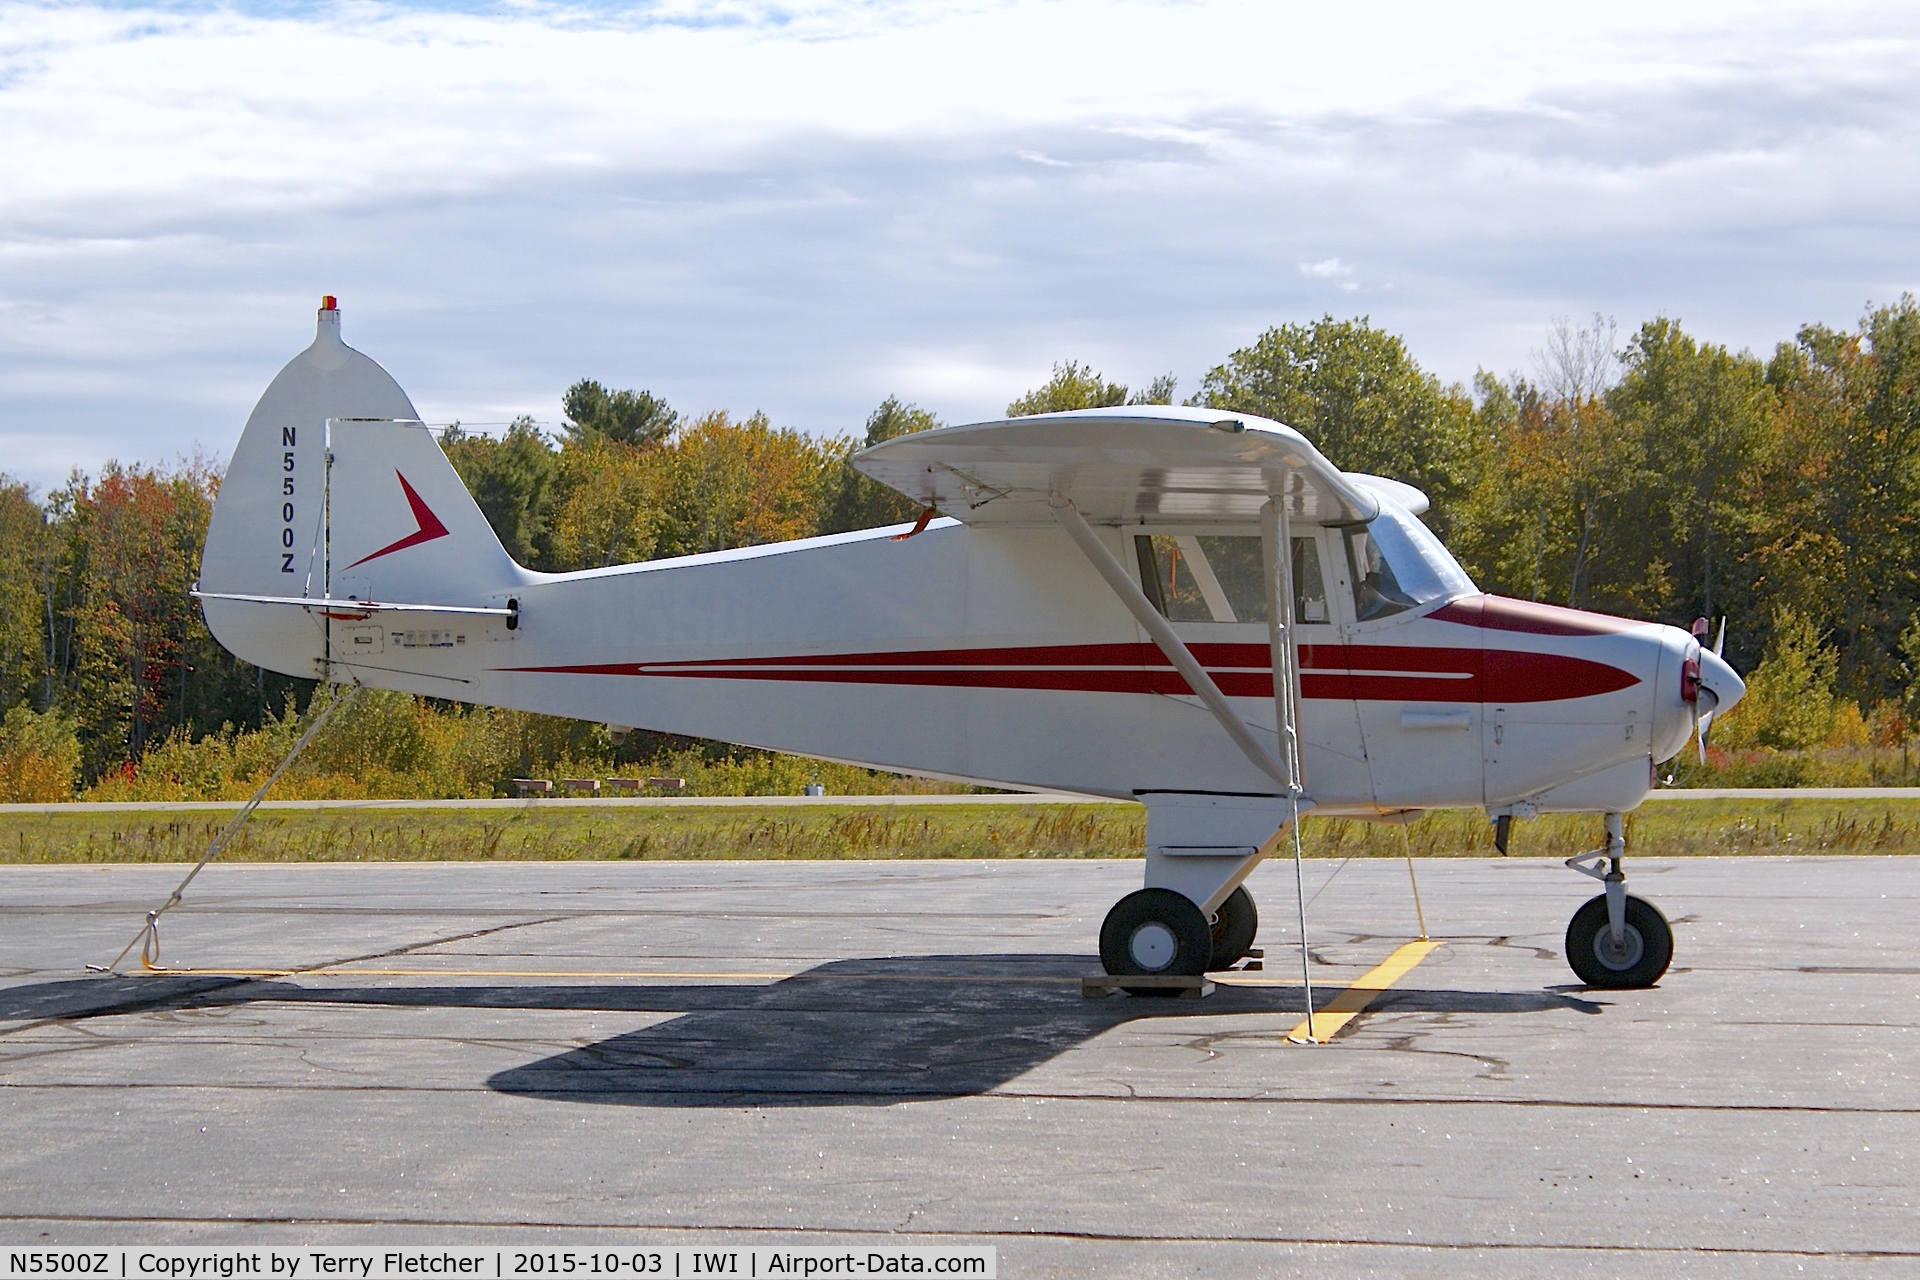 N5500Z, 1962 Piper PA-22-108 Colt C/N 22-9286, At Wiscasset Airport in Maine